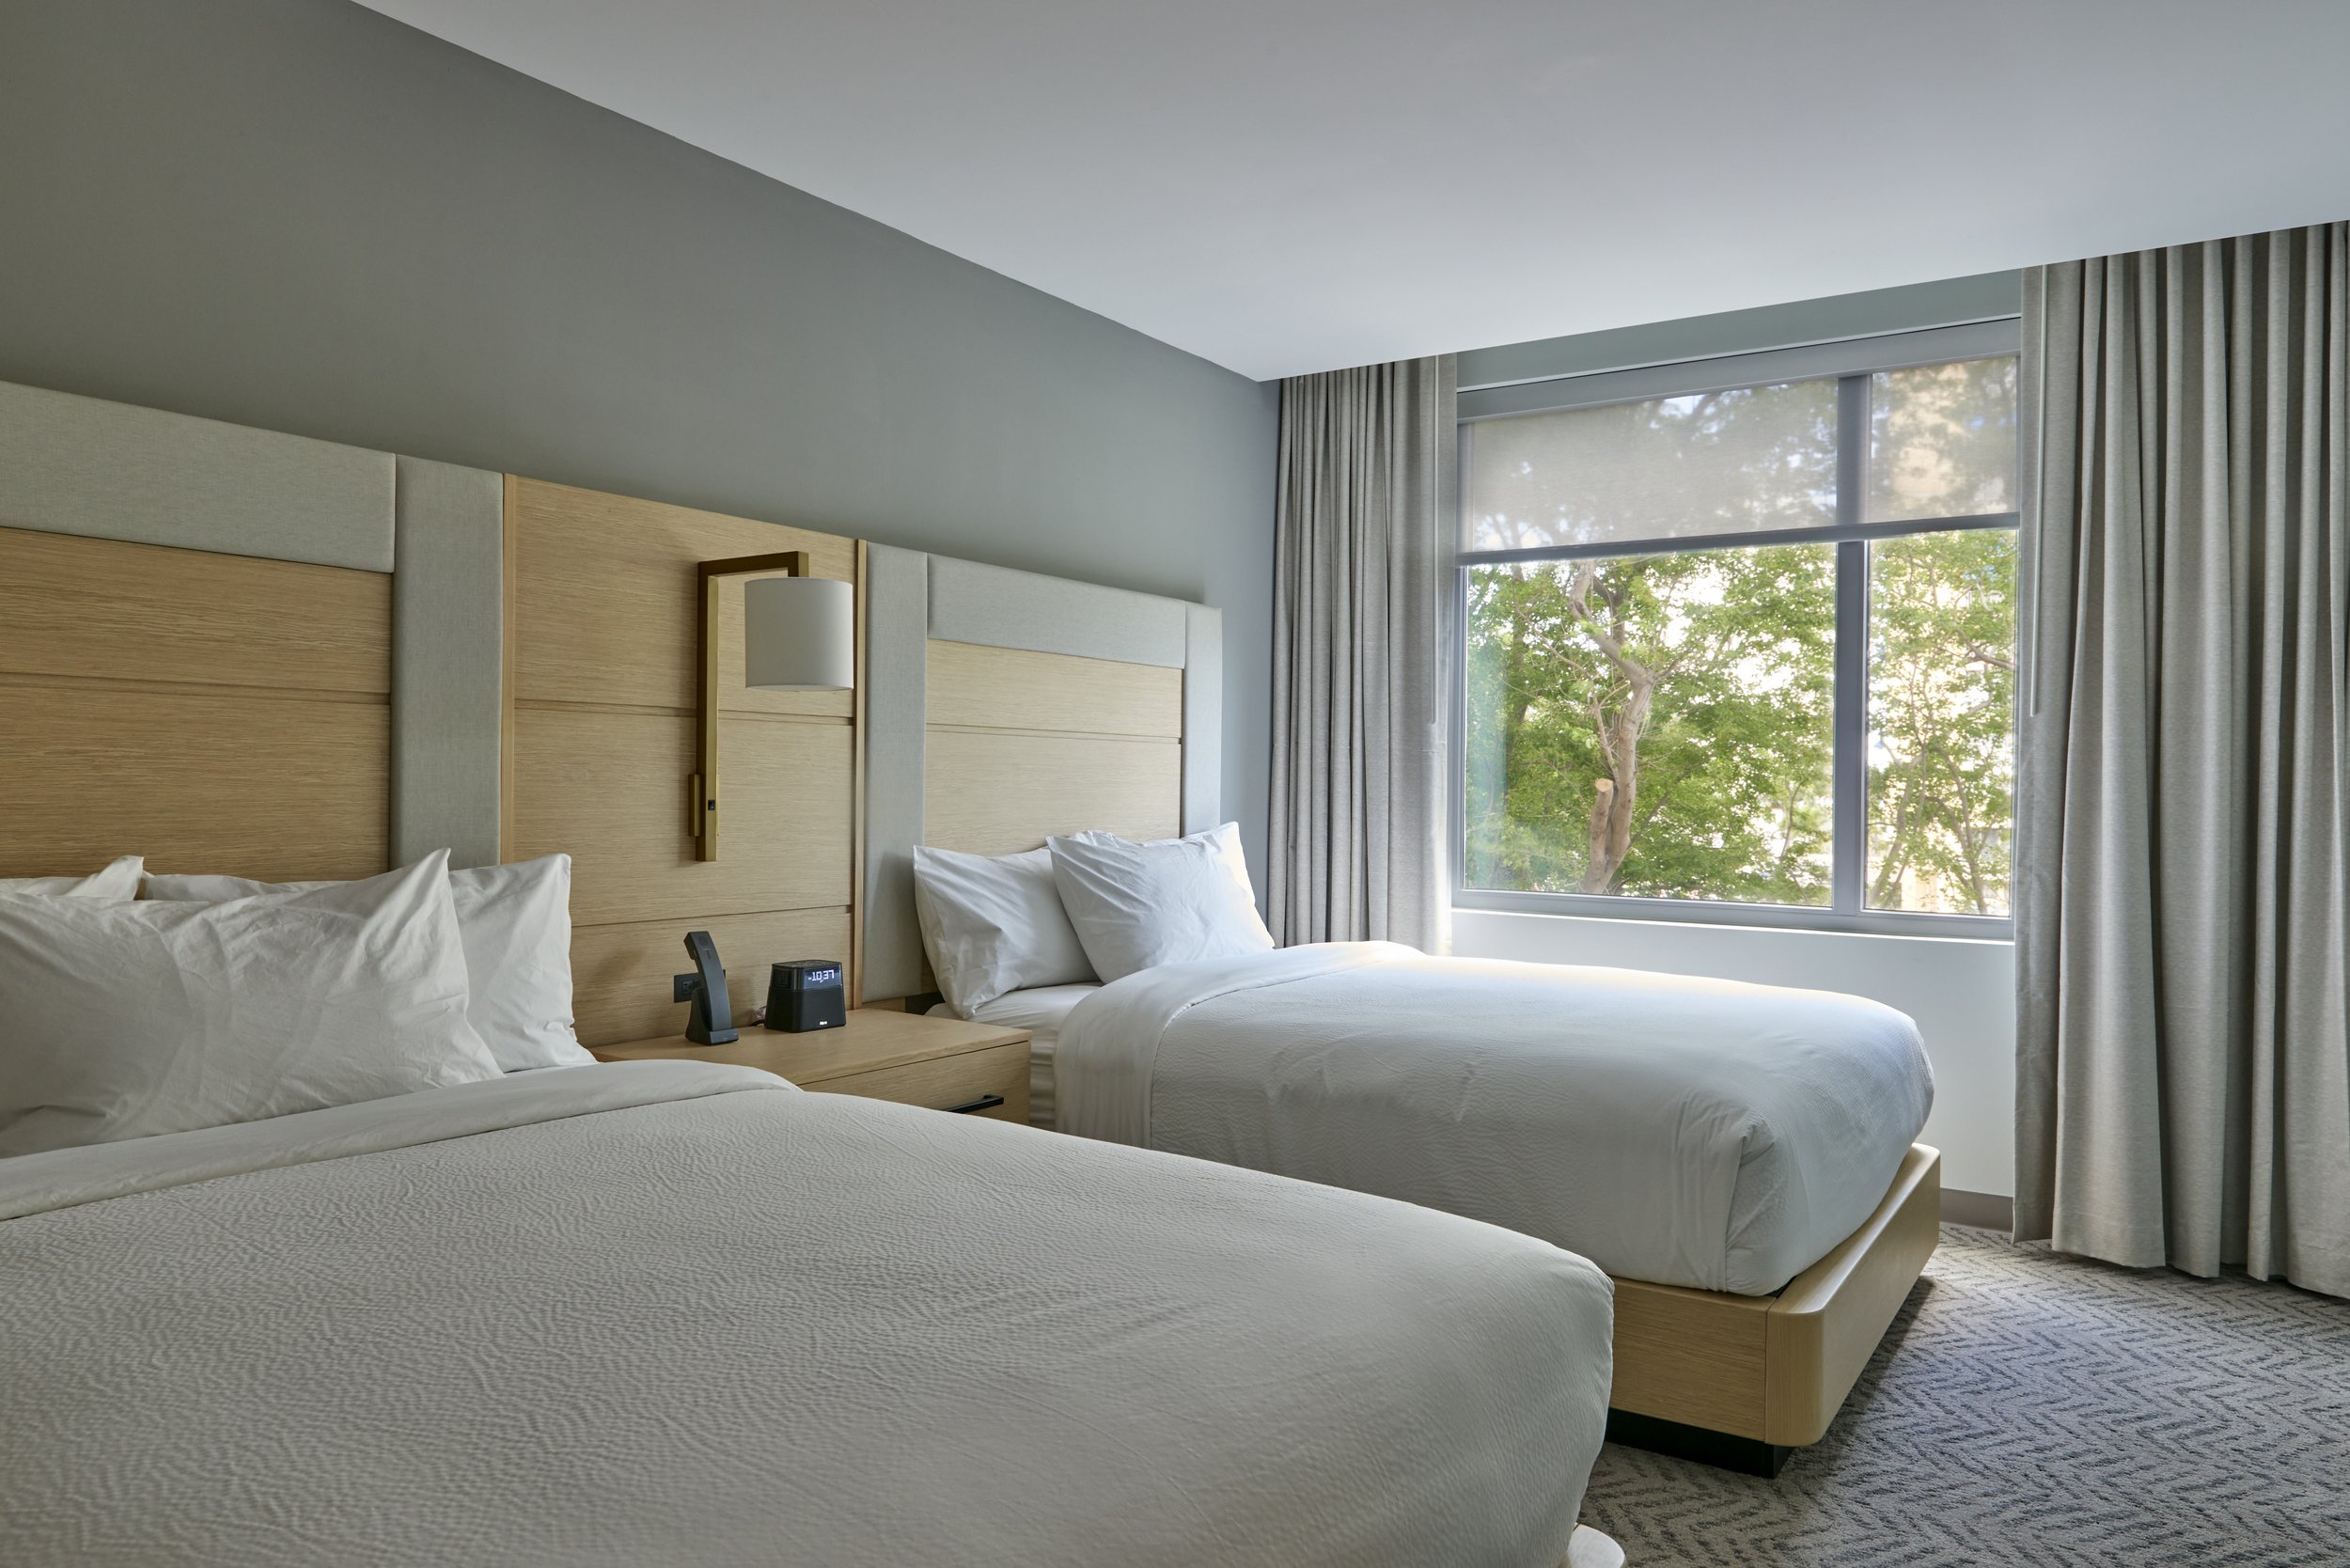  Guest room of the Residence Inn by Marriott hospitality project. 